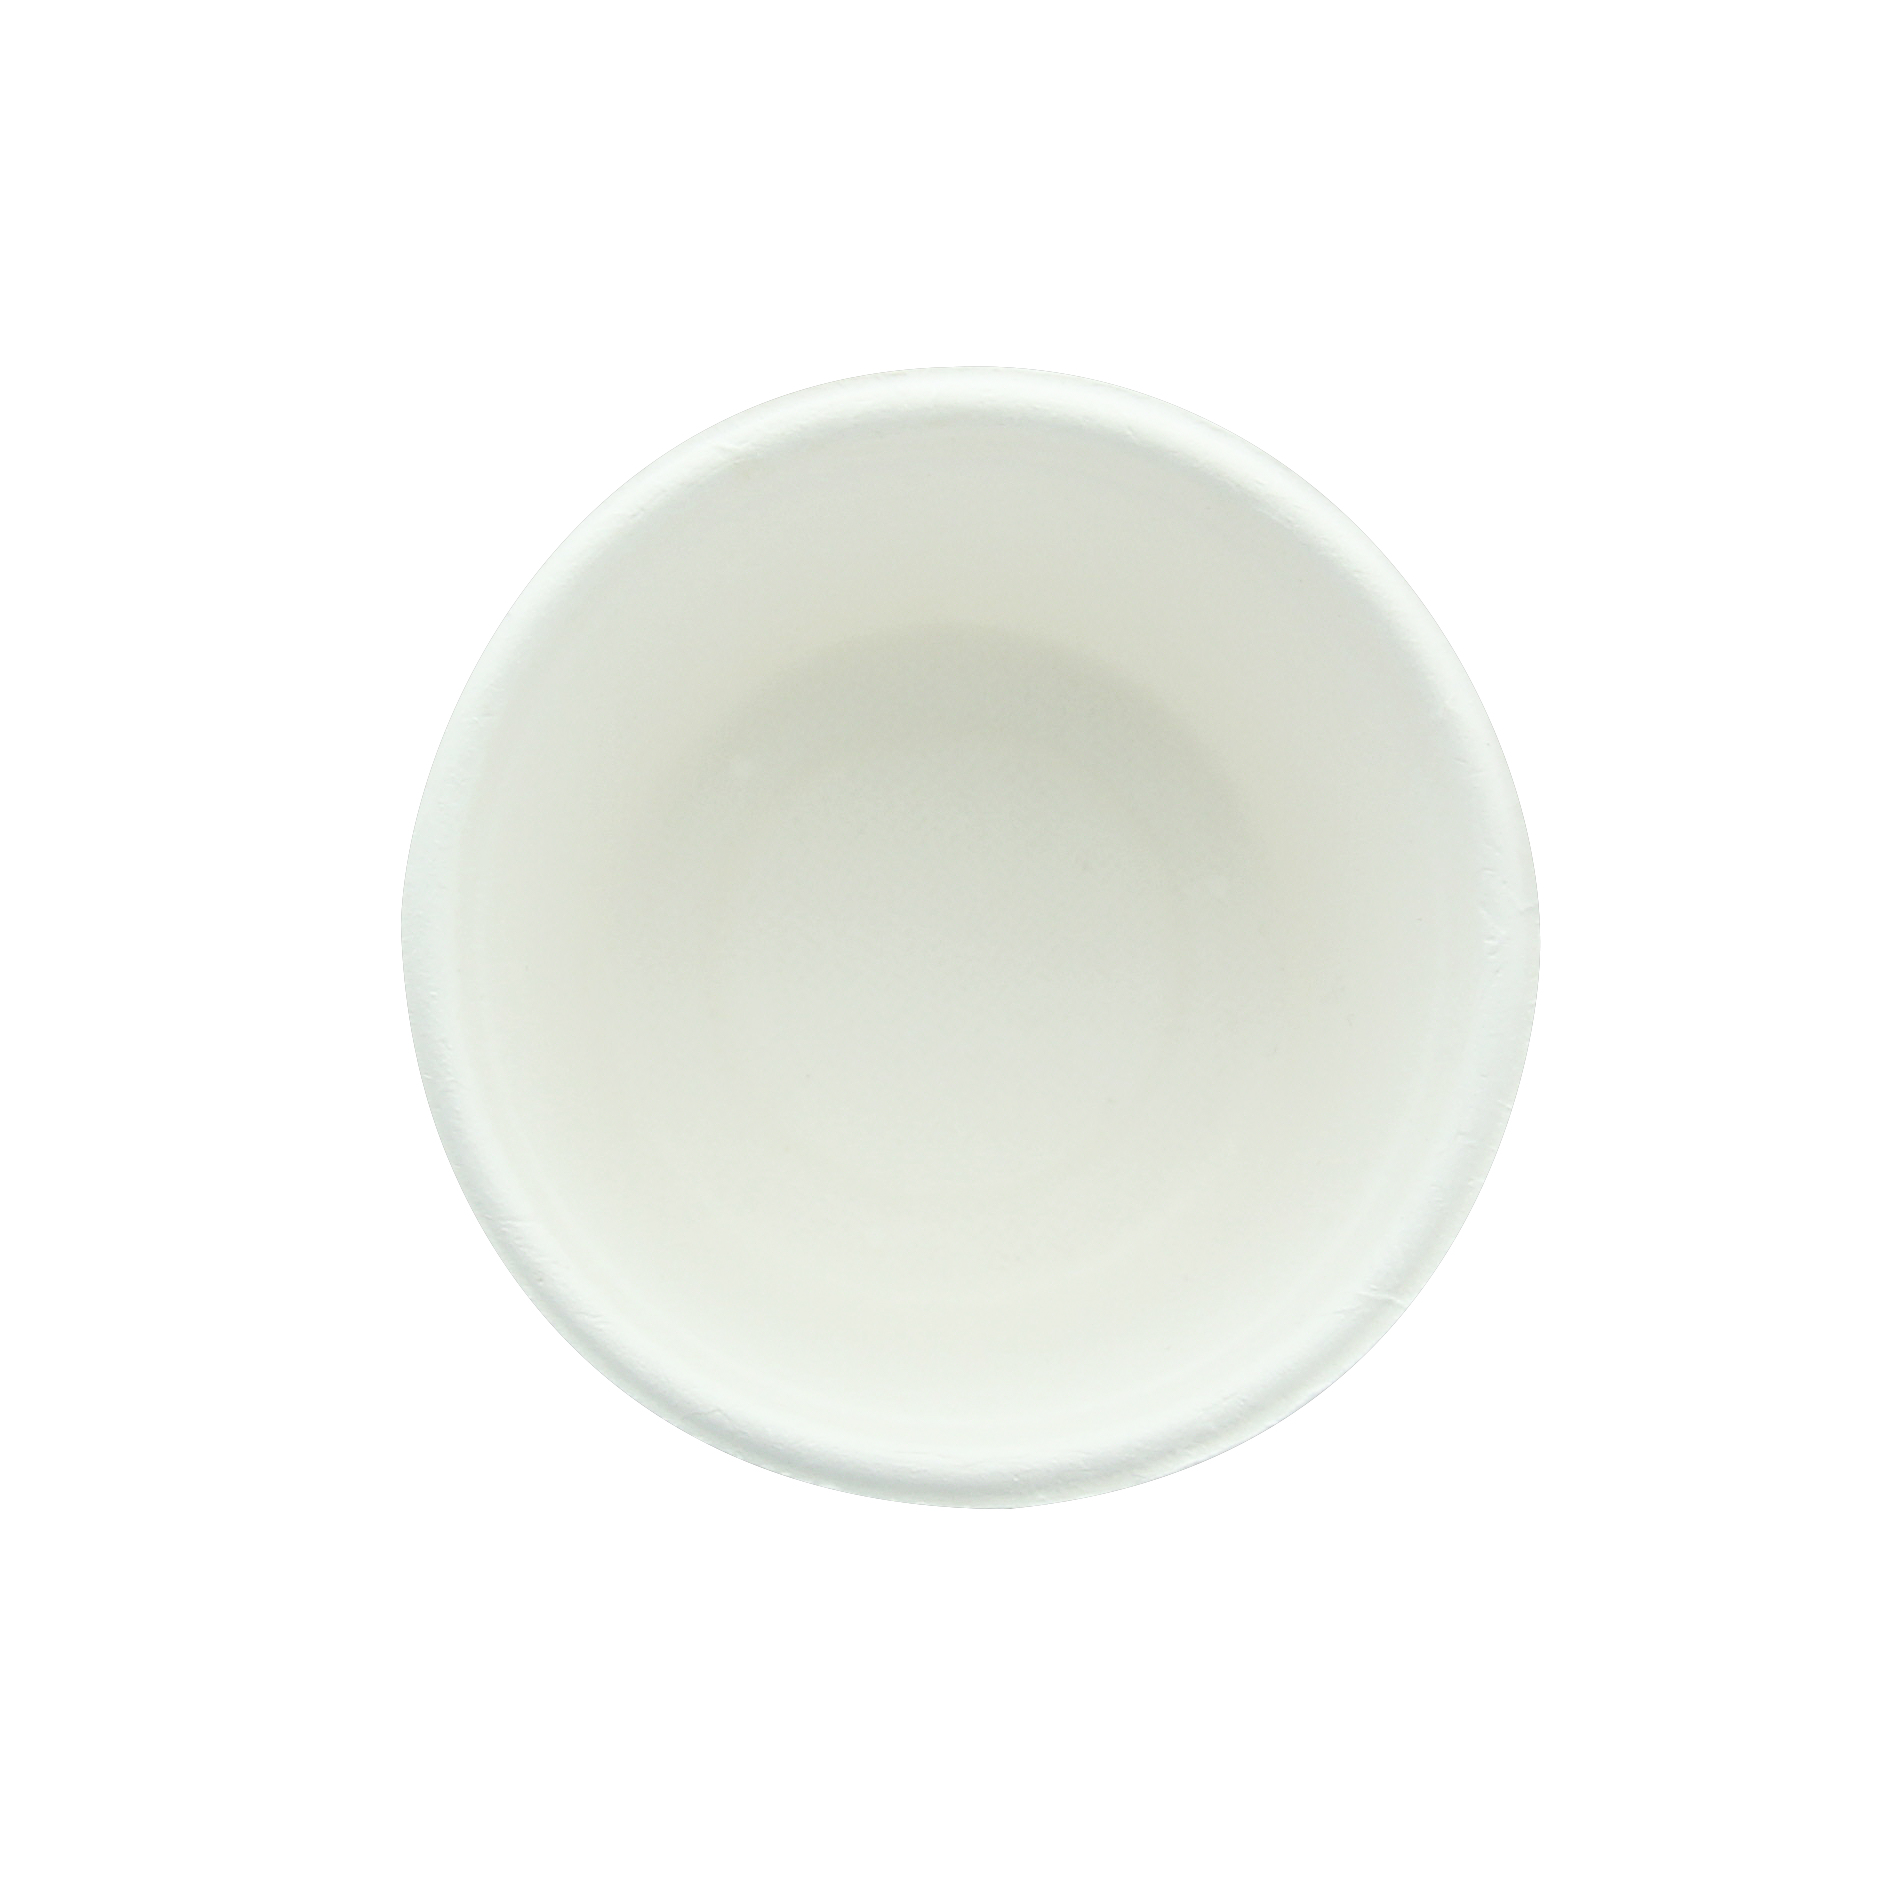 White Sugarcane Souffle / Portion Cup - 2oz D:2.1in - 2000 pcs - Packnwood